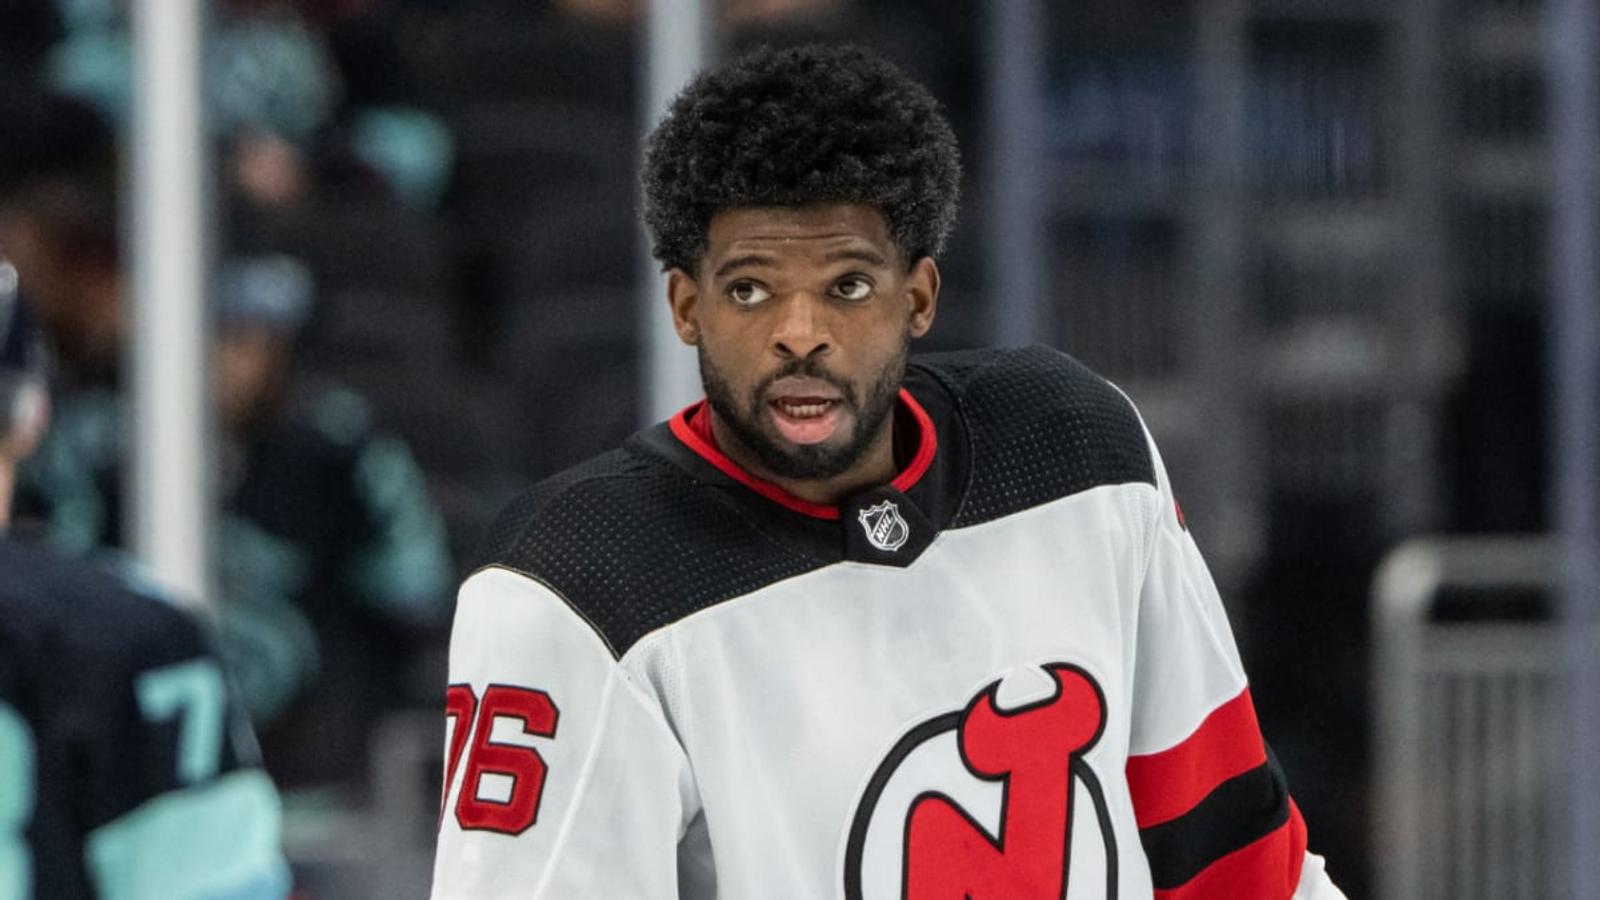 Controversy emerges from P.K. Subban’s retirement